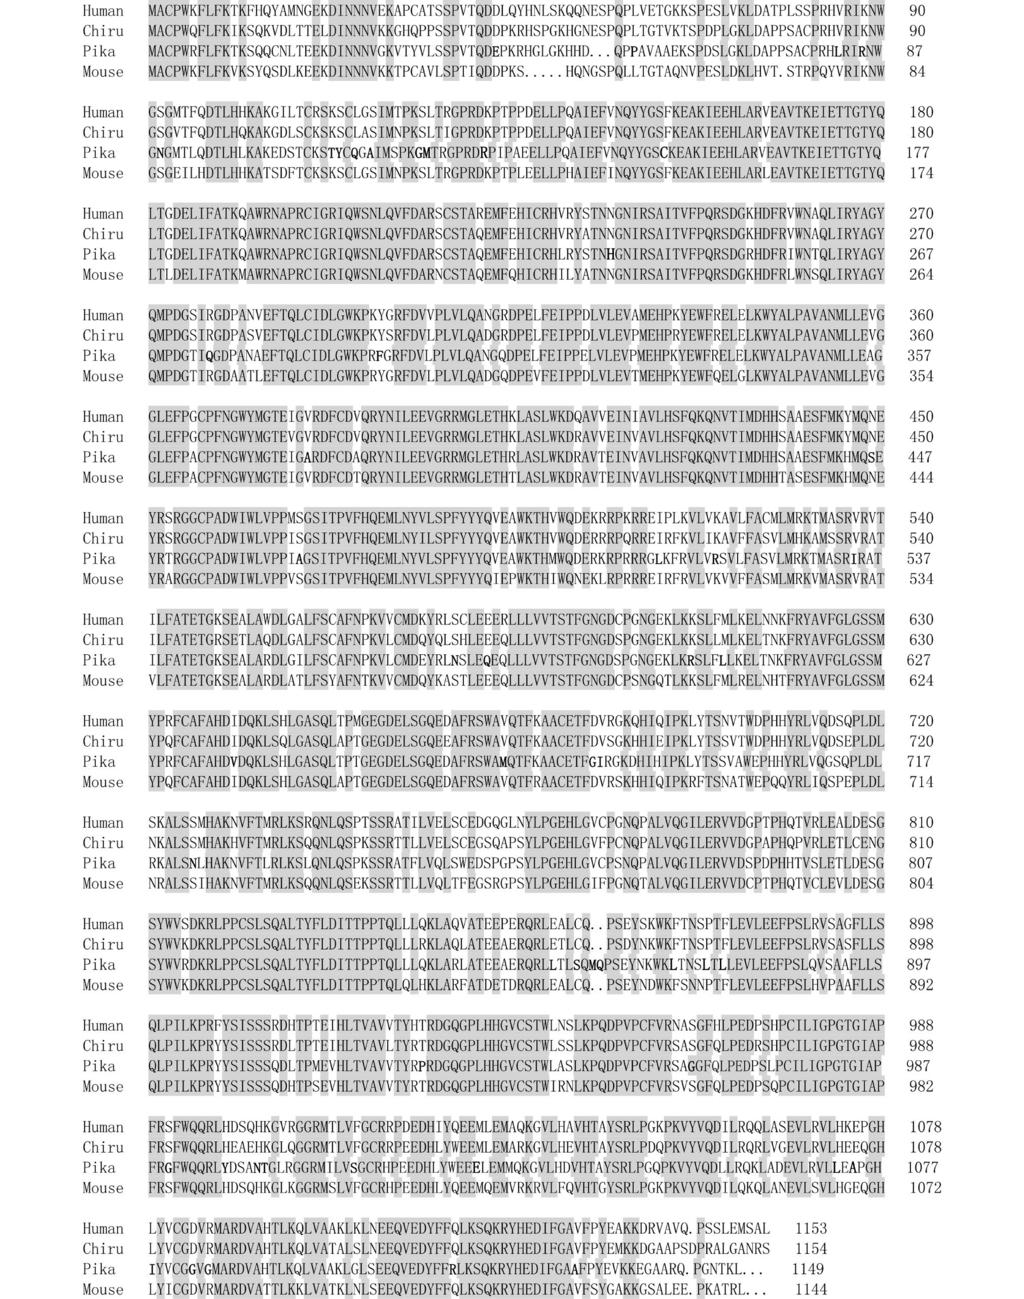 2 NP_000616. 3 AAM11887 XP_005963745. 1 inos inos Fig. 2 Comparison of amino acid sequences of inos among plateau pika human GenBank accession No. NP_000616. 3 mouse GenBank accession no.